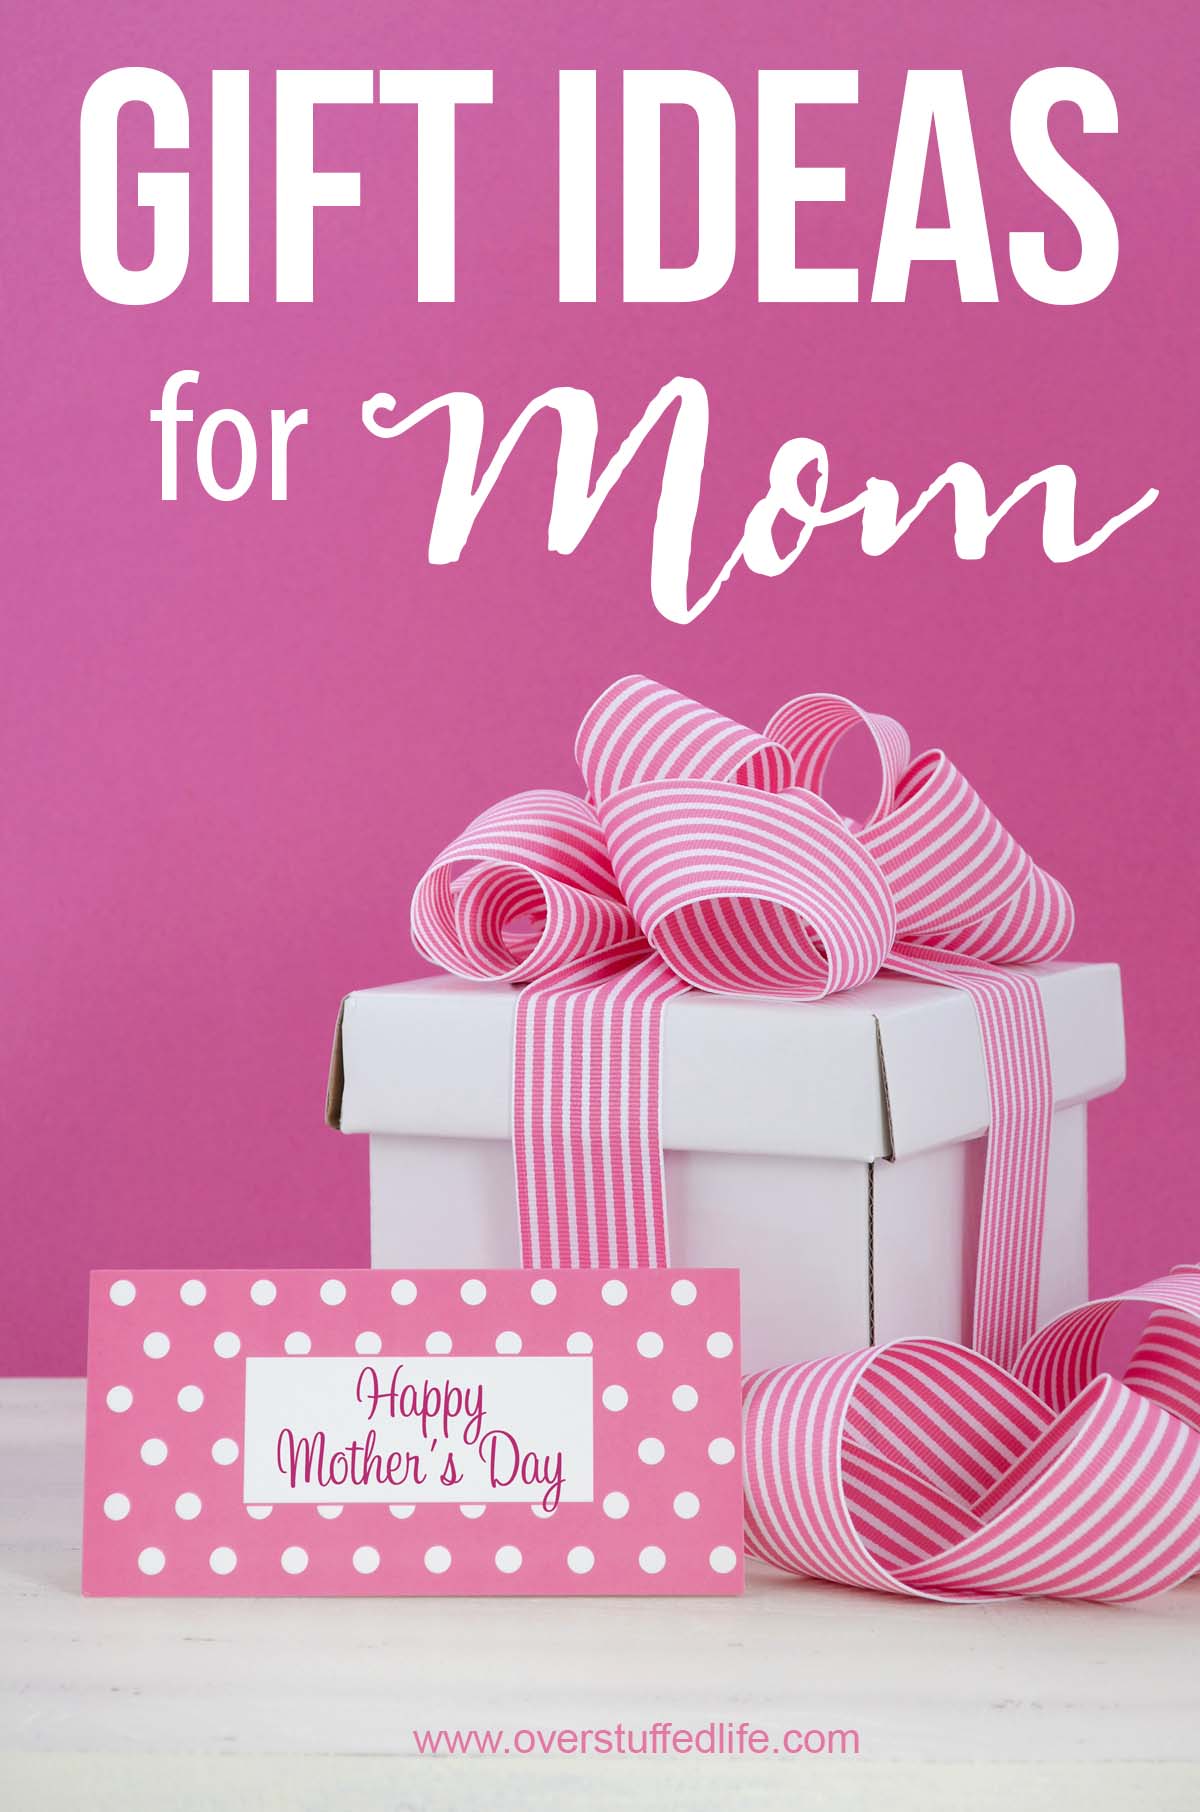 Turns Out Your Mom May Not Love Your Presents, Study Finds - digitalhub US